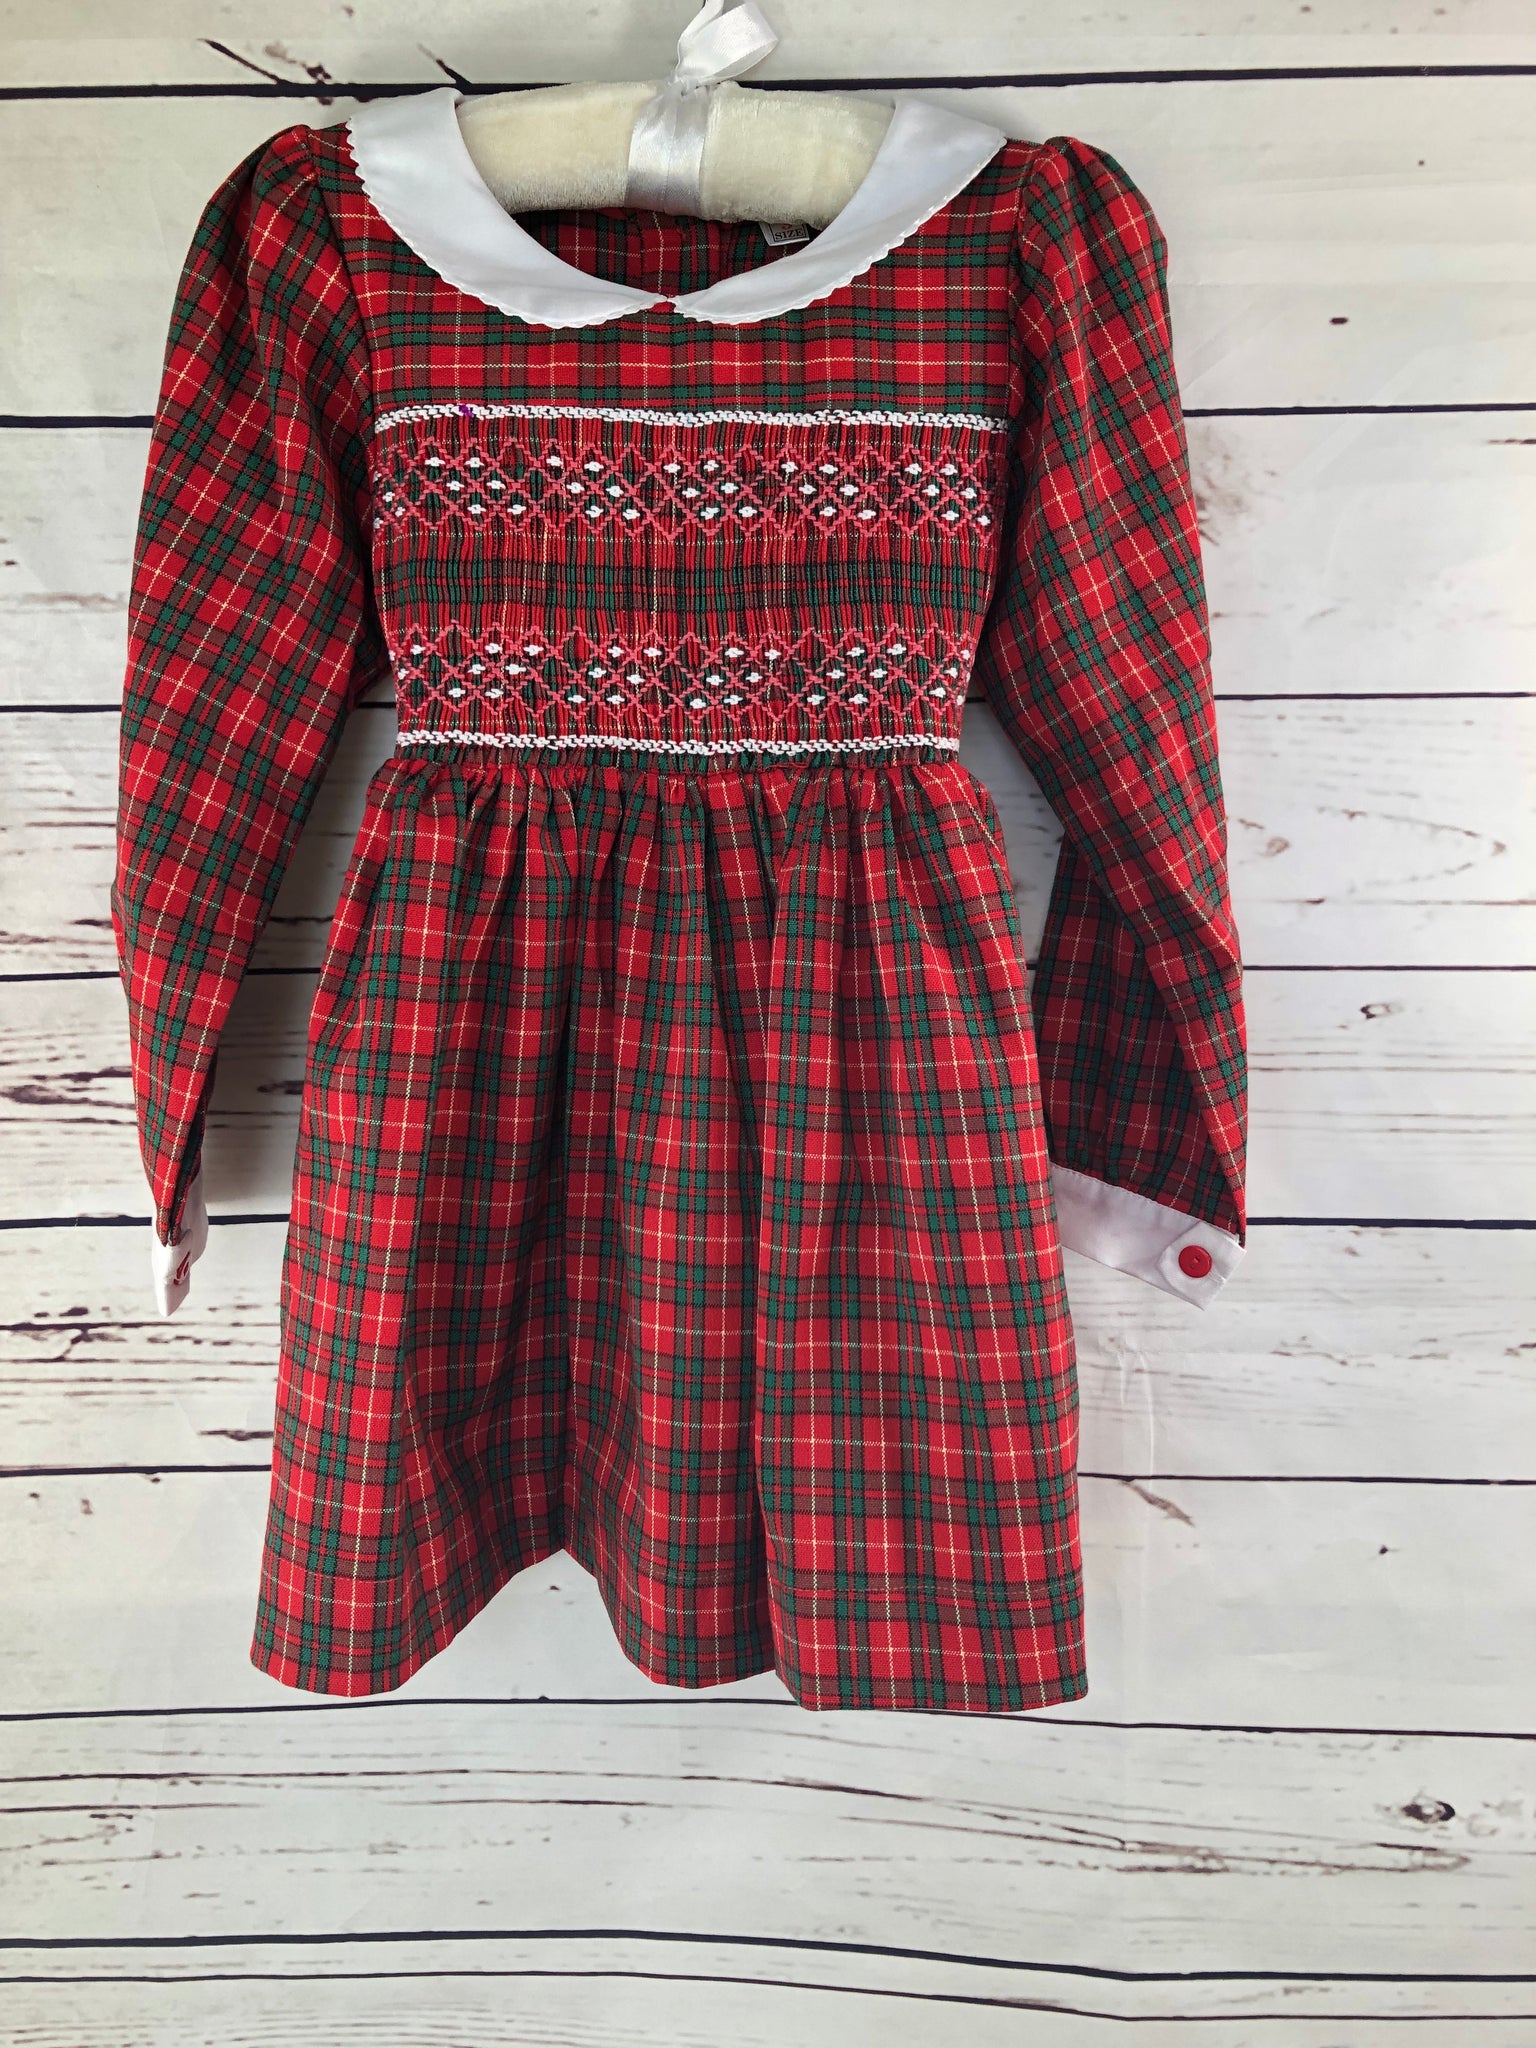 Red green and white plaid vintage smocked dress